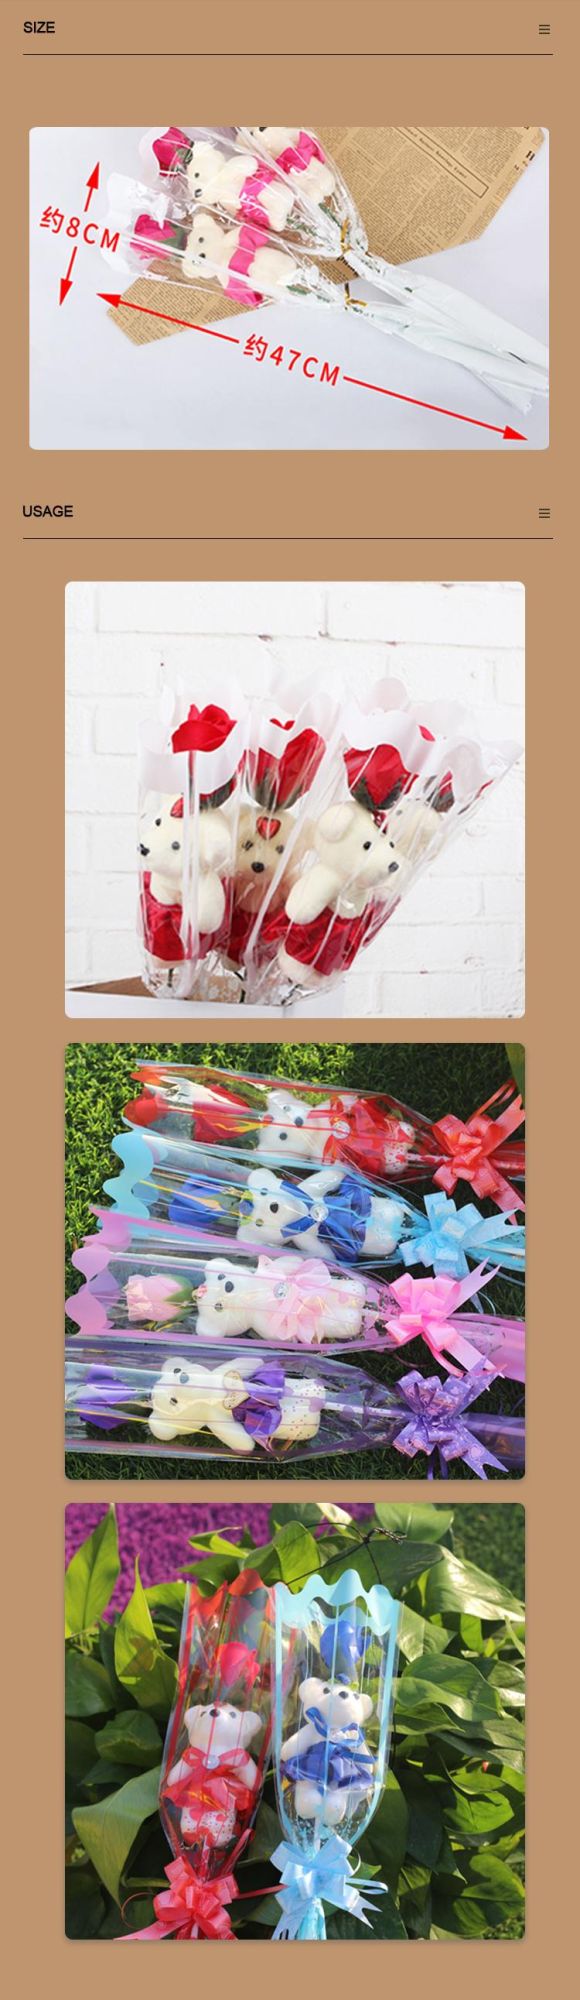 Artificial Soap Flower Bouquet Teddy Bear for Christmas, Valentine′s Day, Mother′s Day Gifts